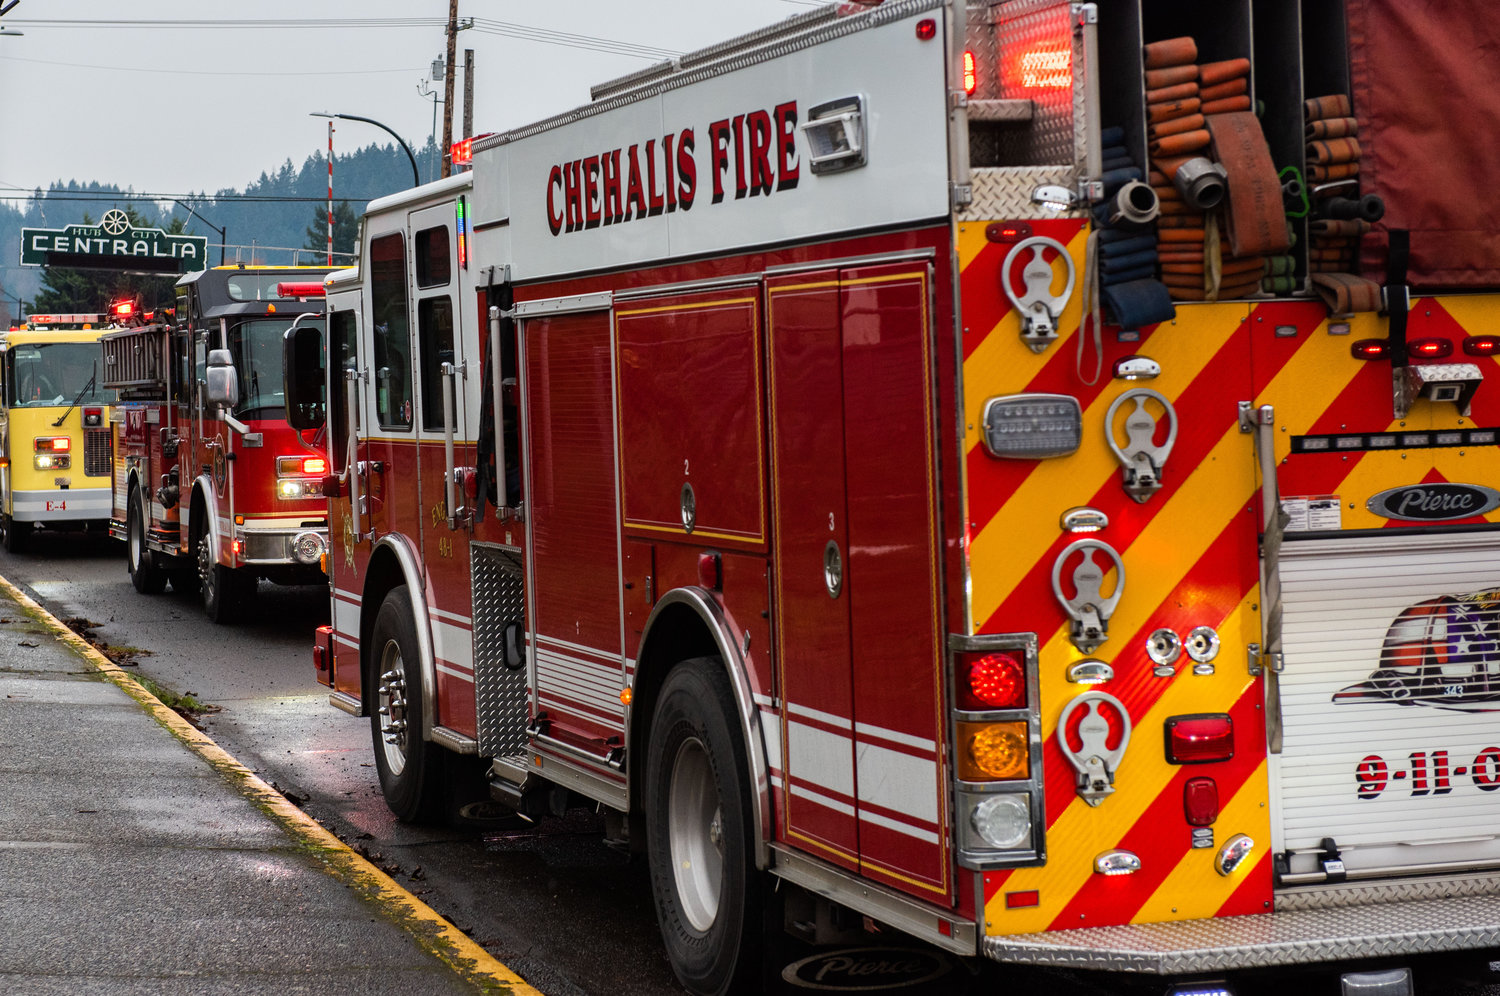 Chehalis Fire and crews from Riverside Fire Authority respond to a residential structure fire off W. Main Street in Centralia on Sunday.